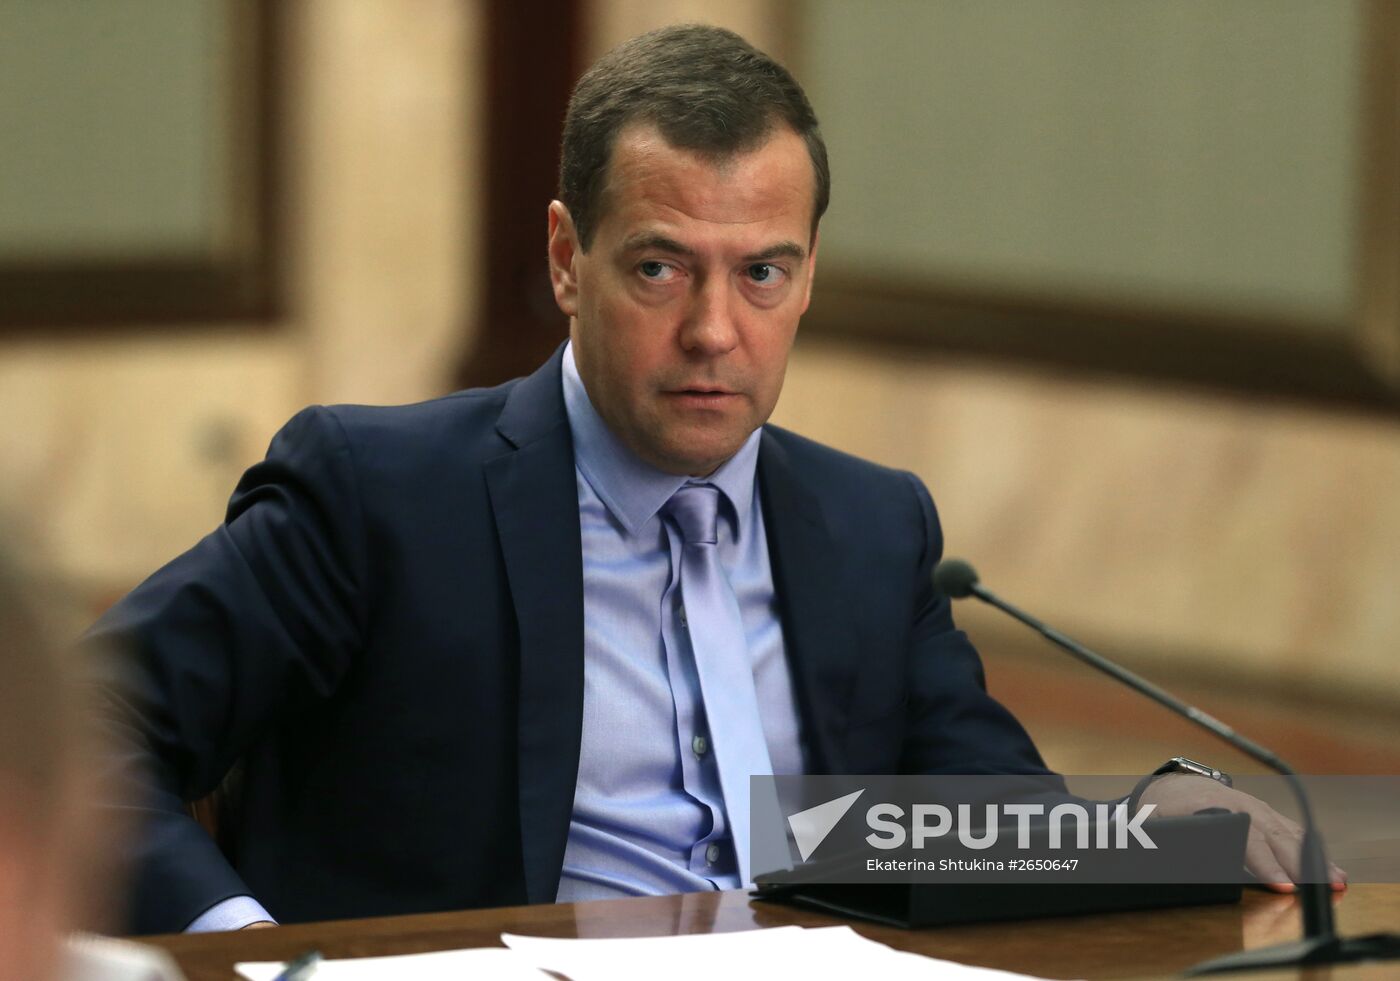 Prime Minister Dmitry Medvedev chairs government commission meeting